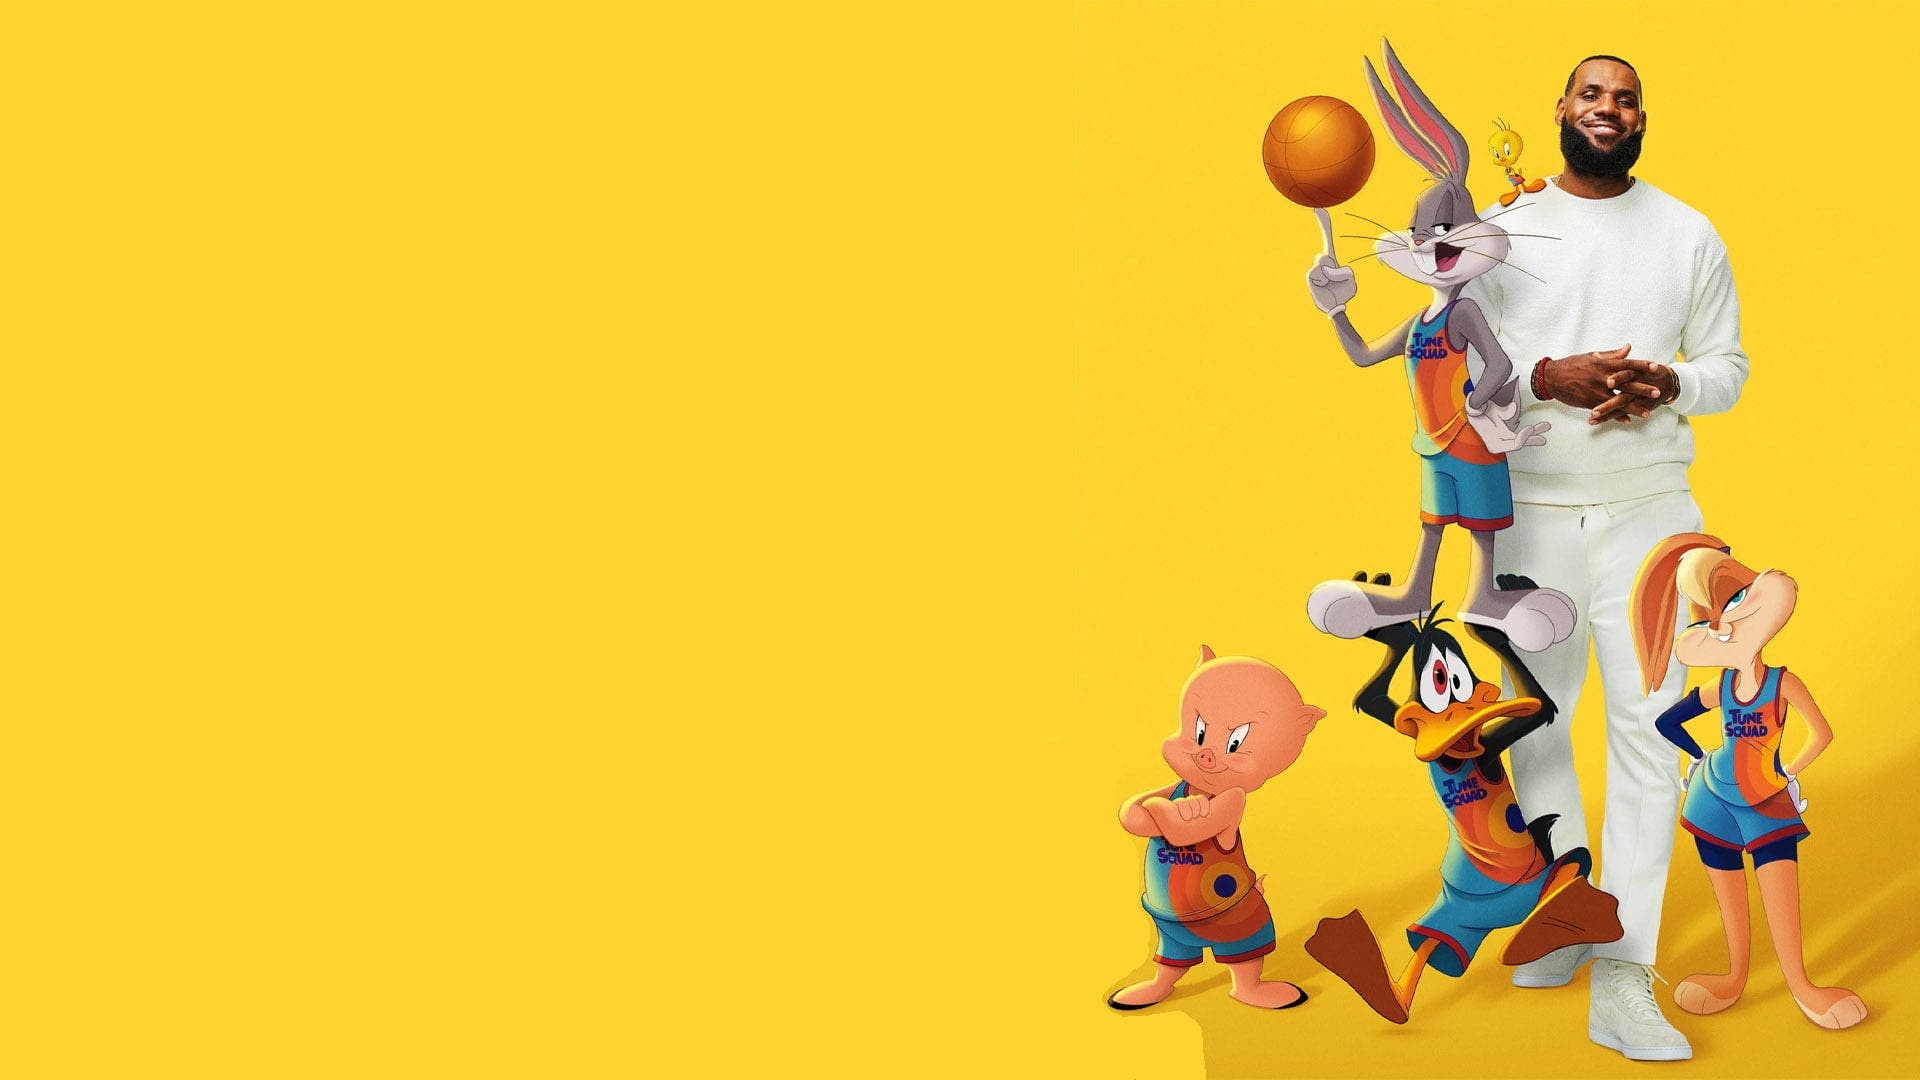 Space Jam: A New Legacy, Iconic basketball moments, New generation heroes, Epic adventure, 1920x1080 Full HD Desktop